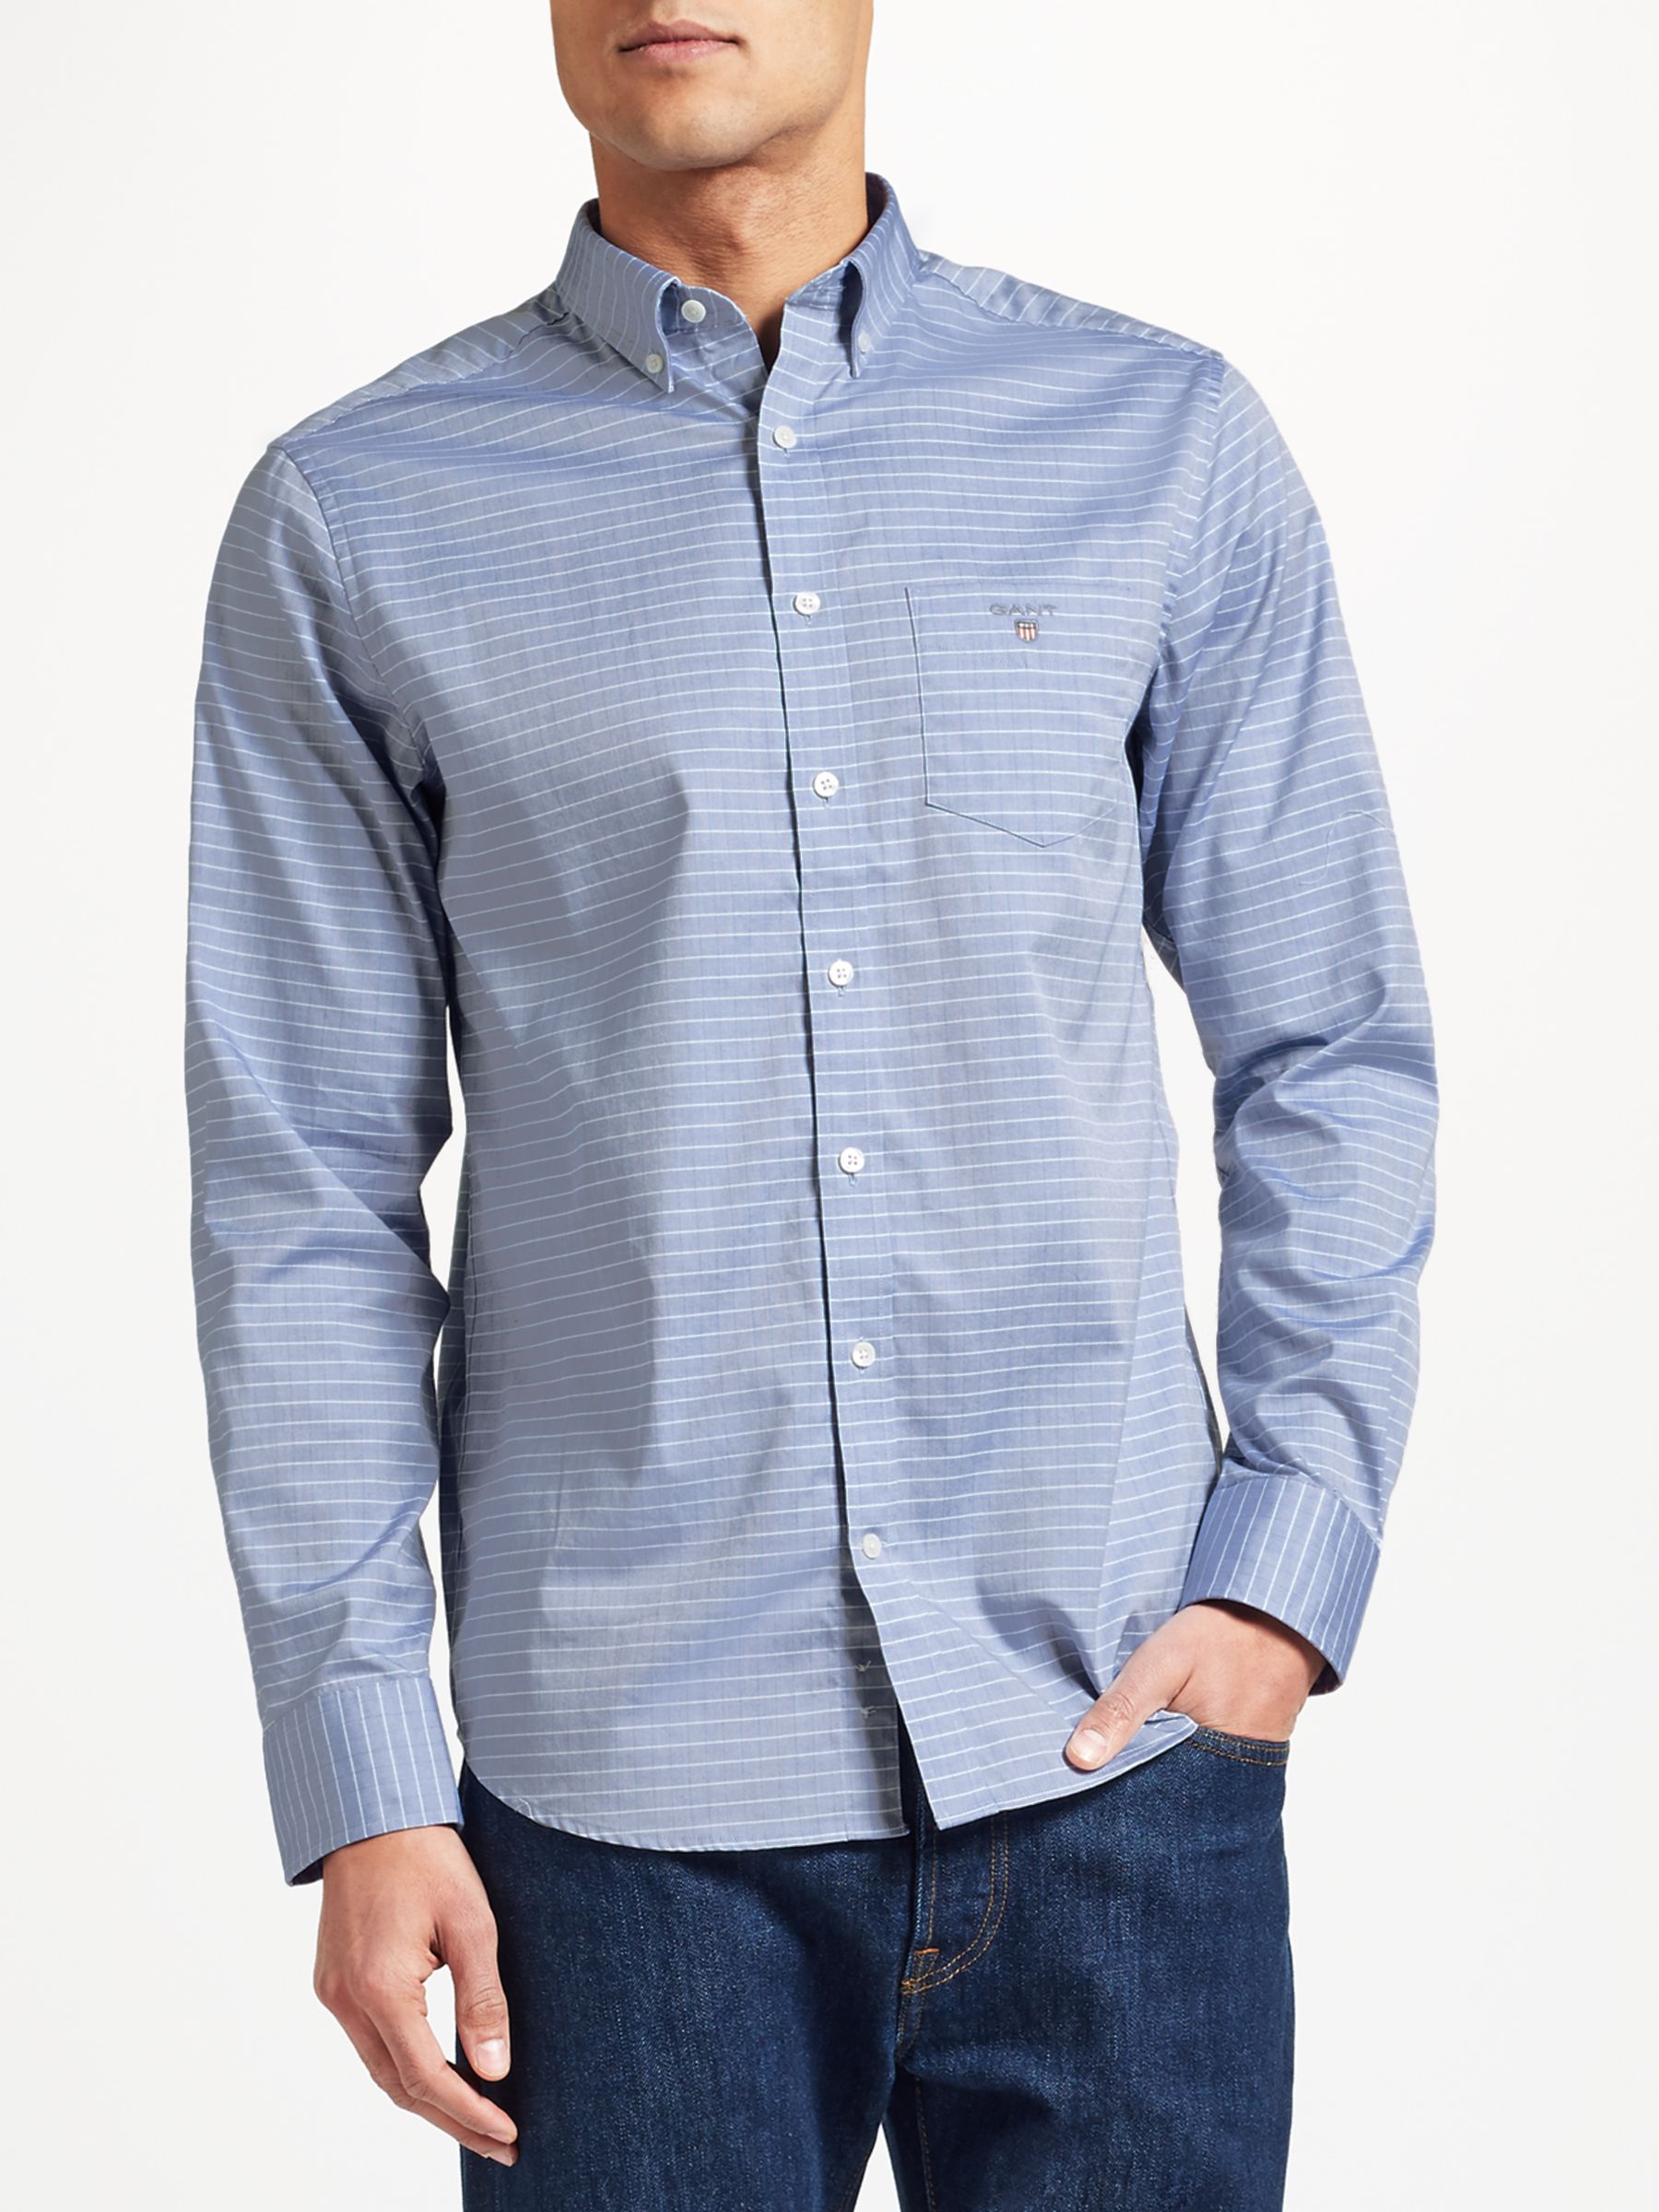 GANT Two Ply 80s Pinpoint Cotton Check Oxford Shirt, Blue at John Lewis ...